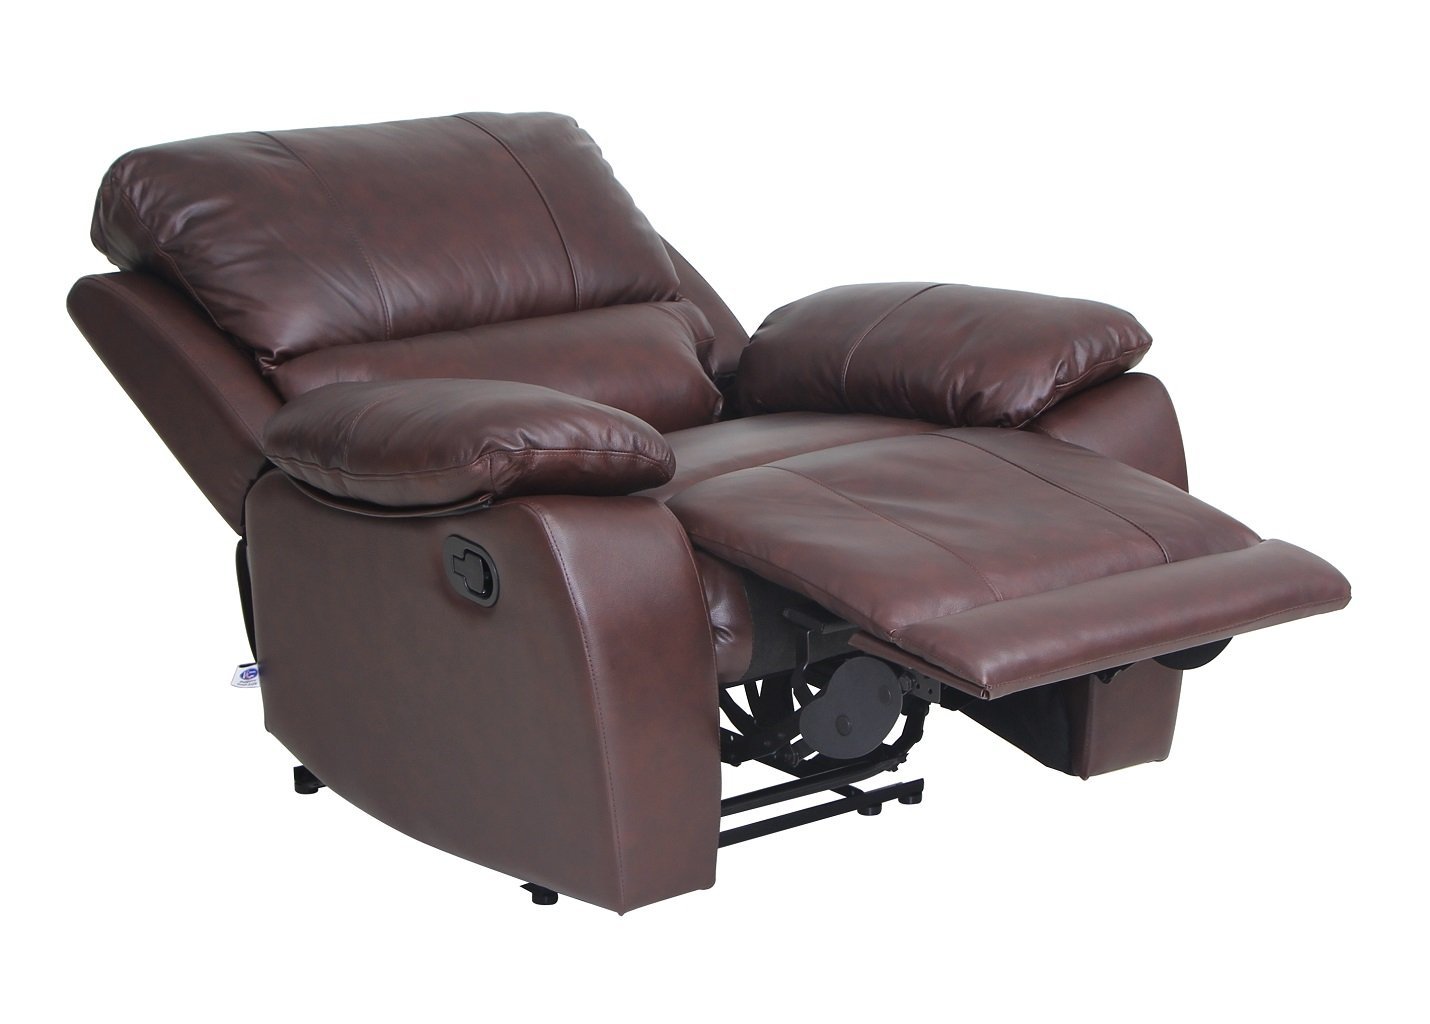 VIVA HOME Top Grain Leather Recliner Chair Classic And Traditional Style With Overstuff Armrest And Headrest